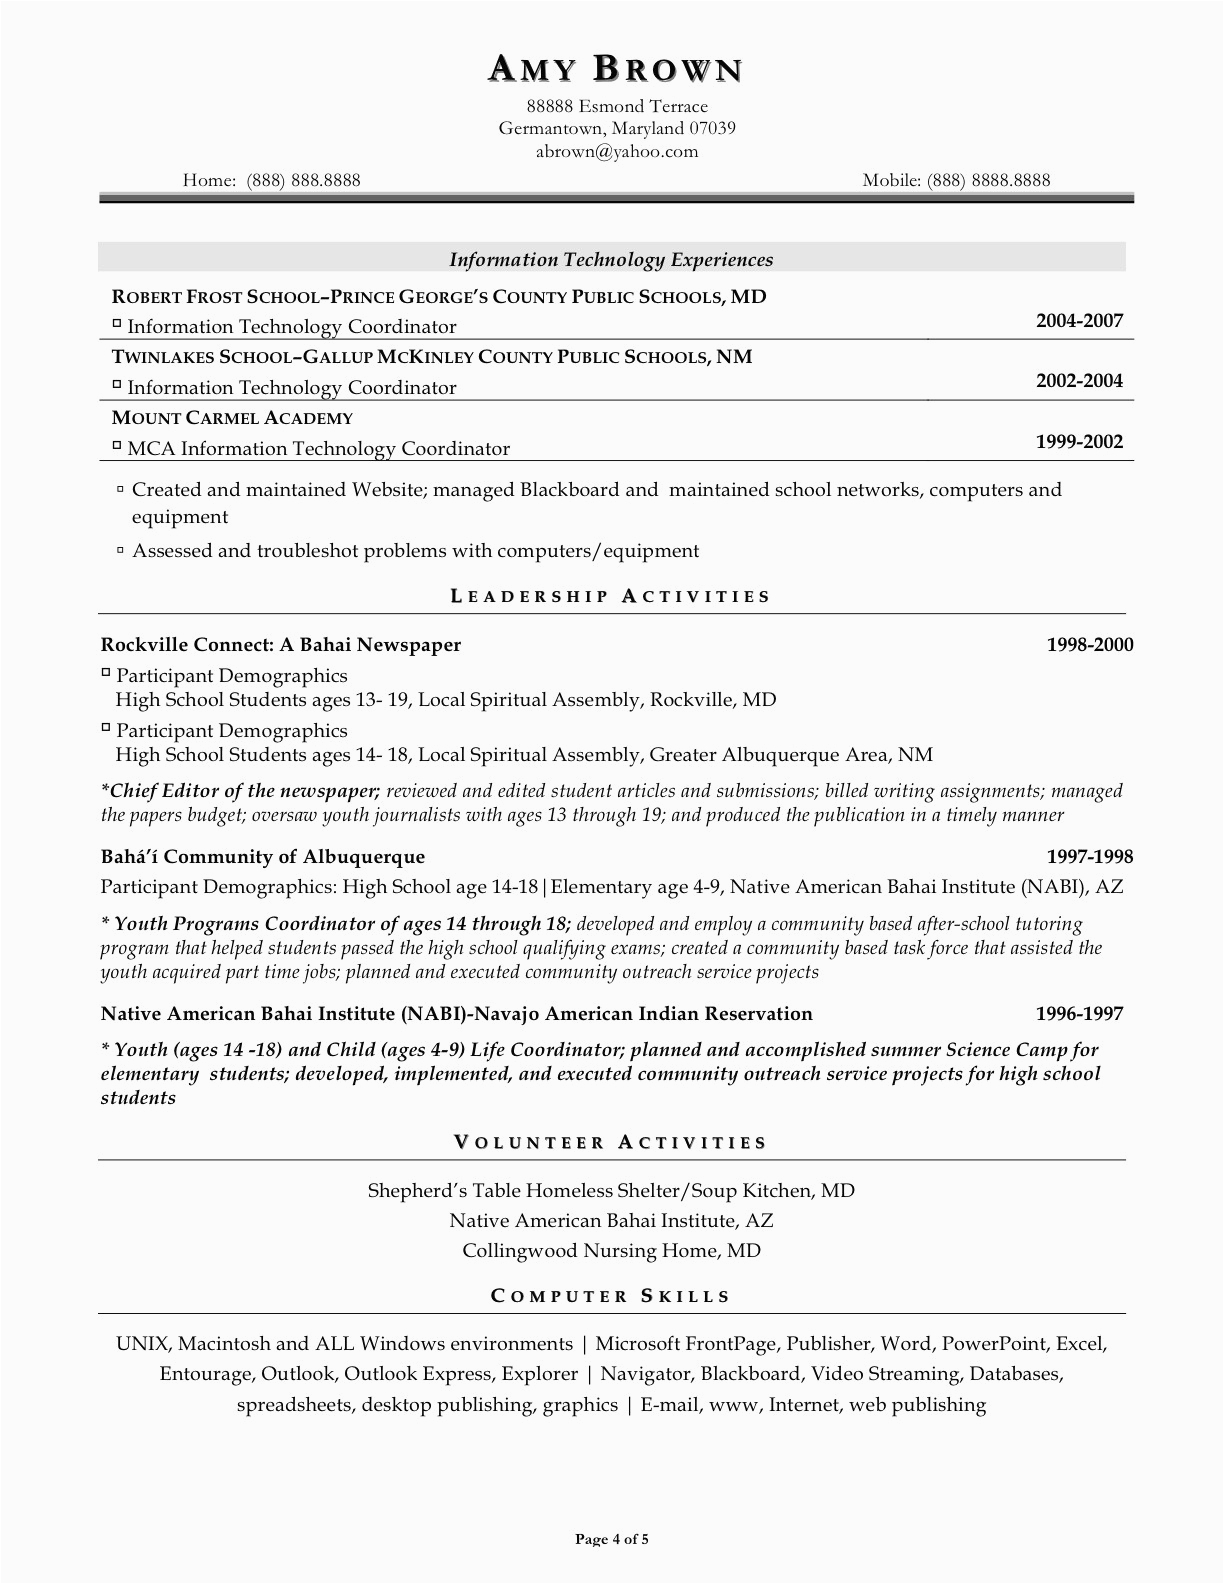 Sample Resume for Students Applying to University Sample College Application Resume Ivy League